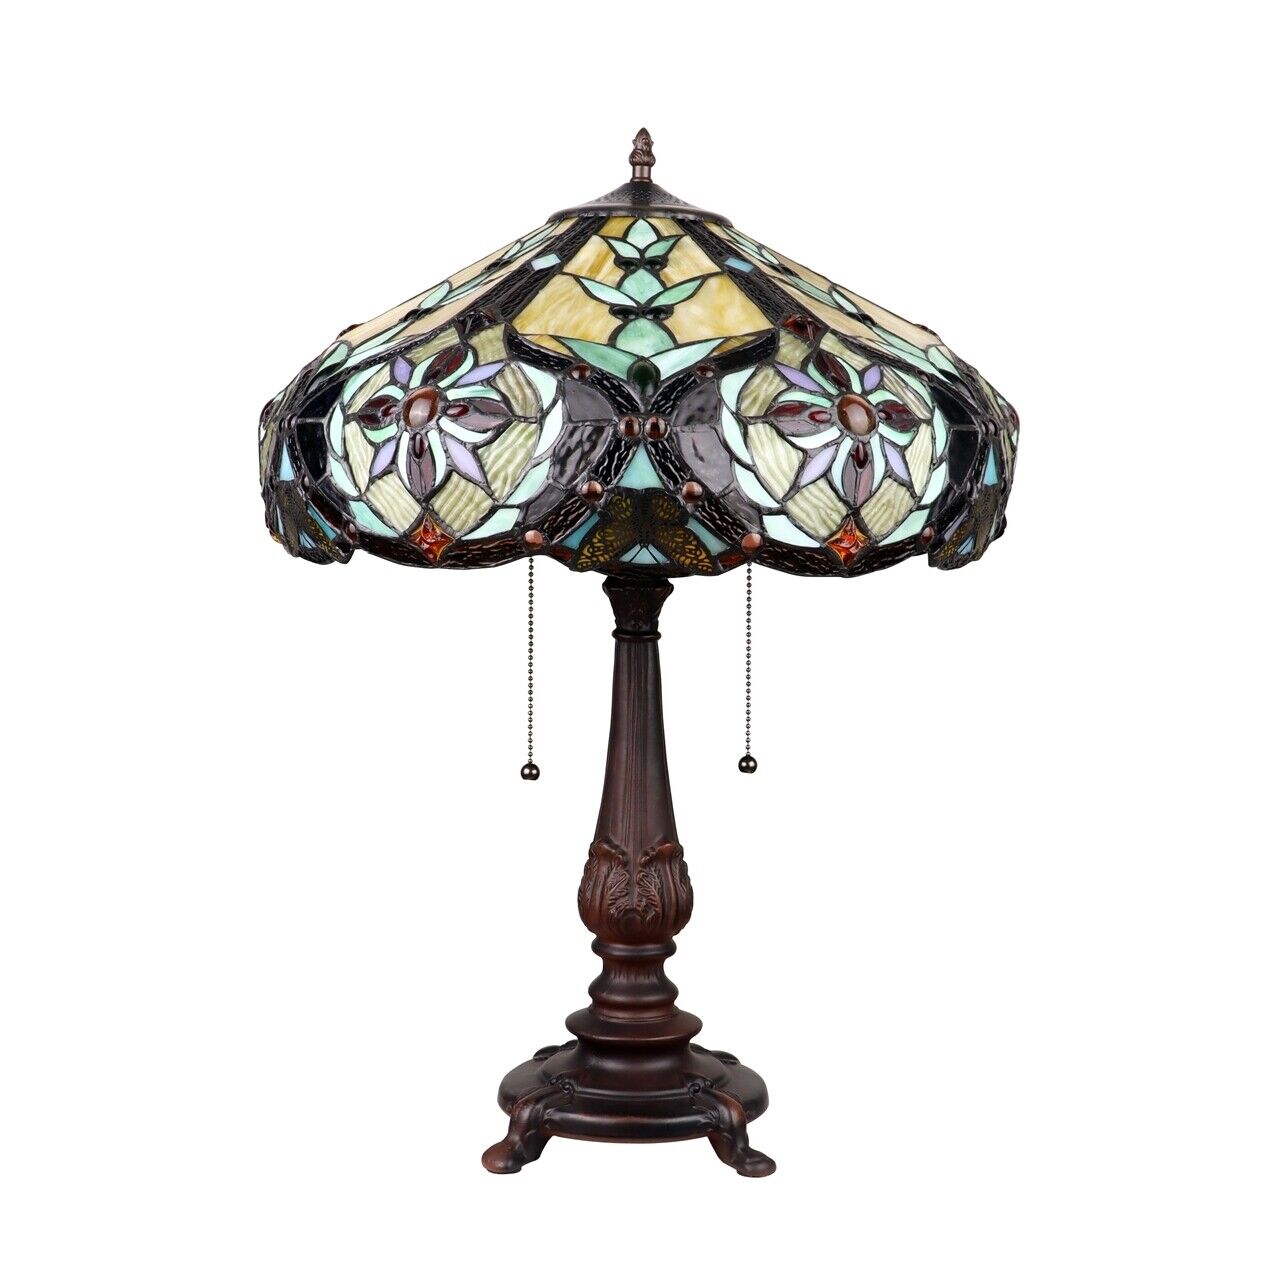 23.6" Antique Vintage Style Stained Glass Table Lamp